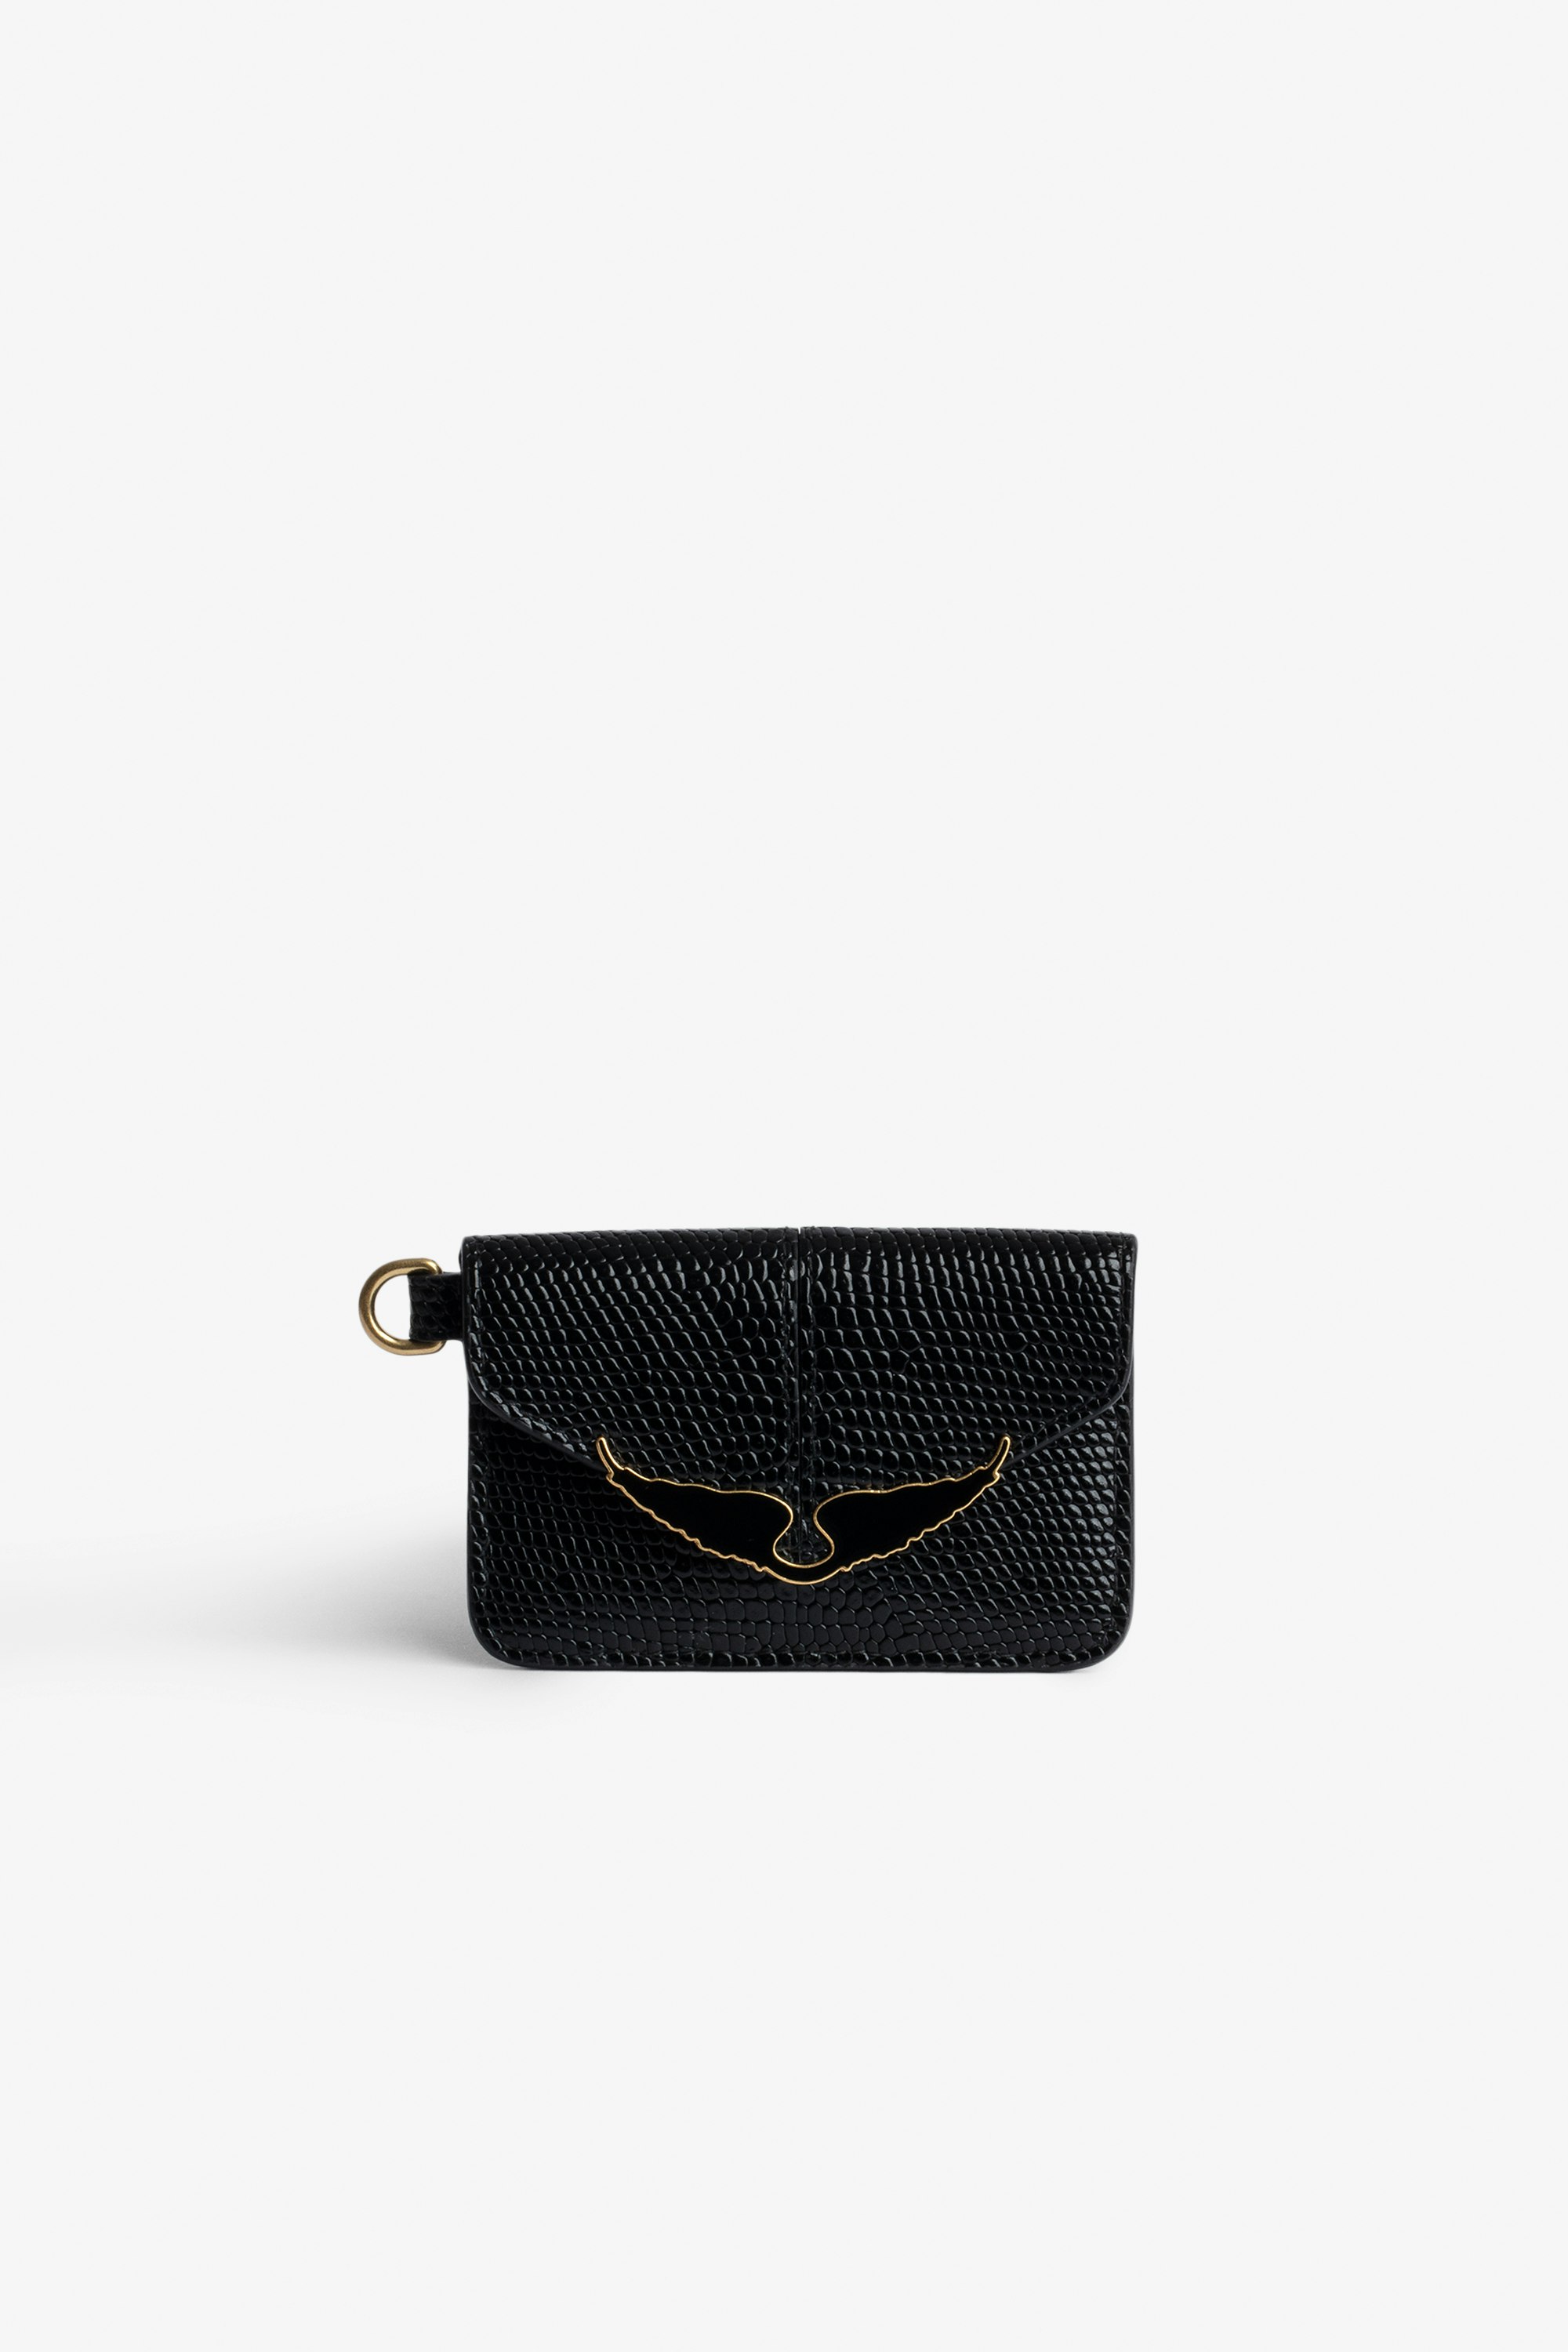 Borderline Pass Card Case - Women’s card case in shiny black leather with embossed iguana and black lacquered wings on the clasp.